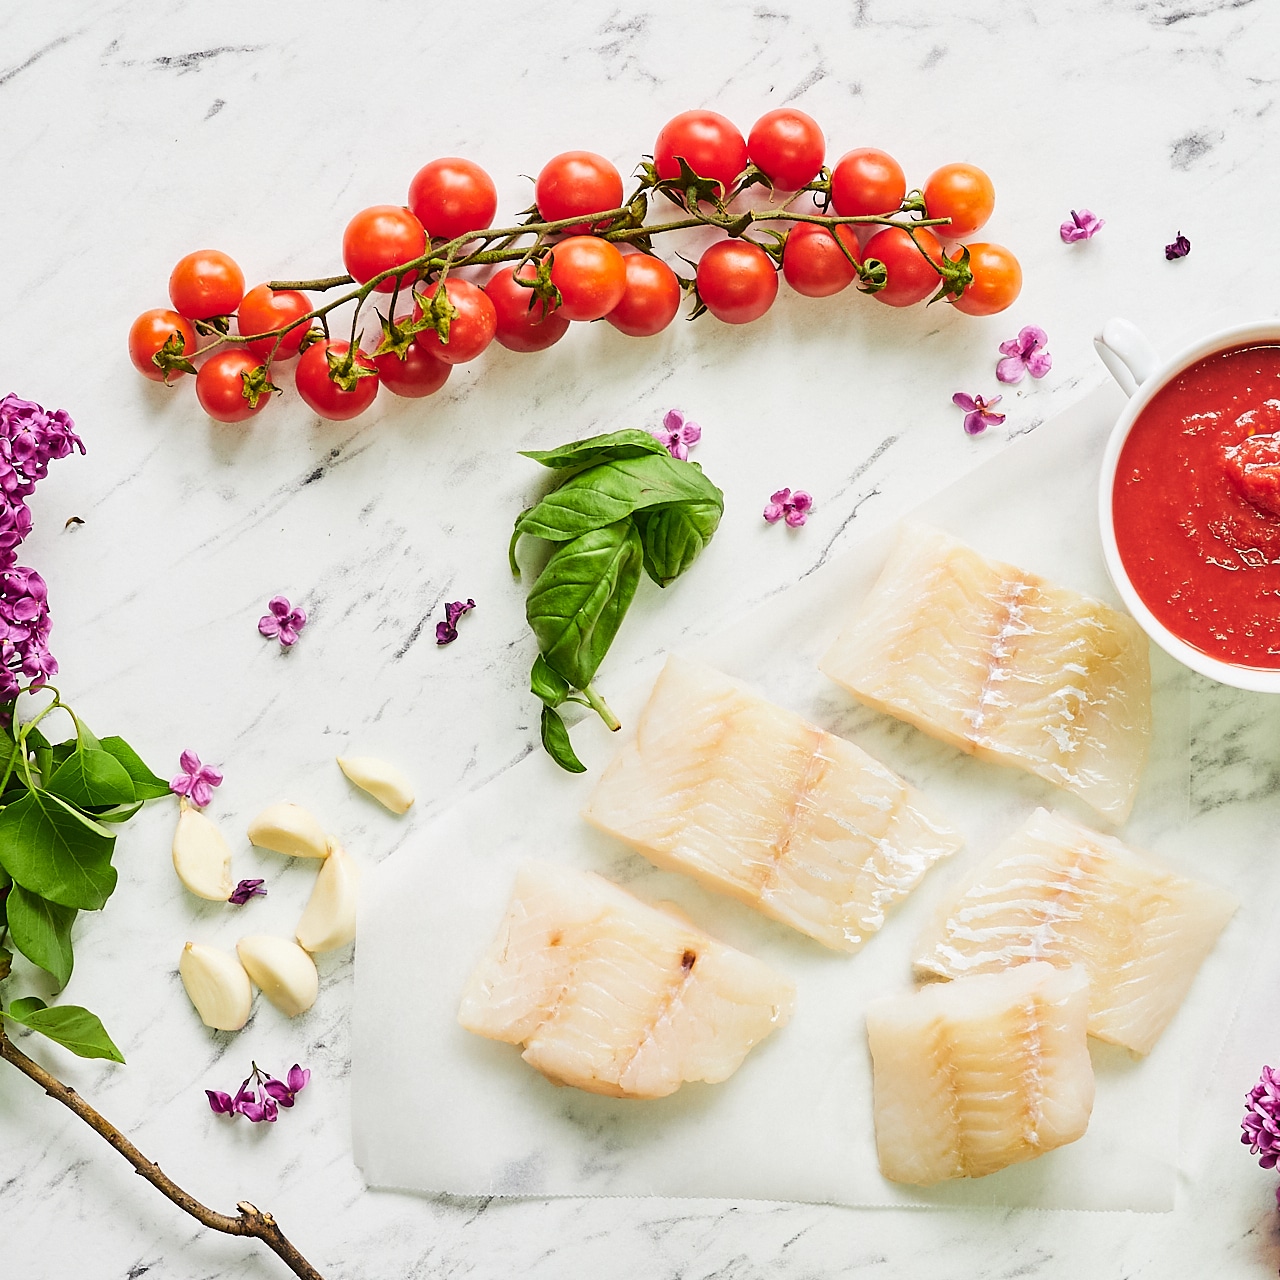 ingredients cod fillets tomato sauce